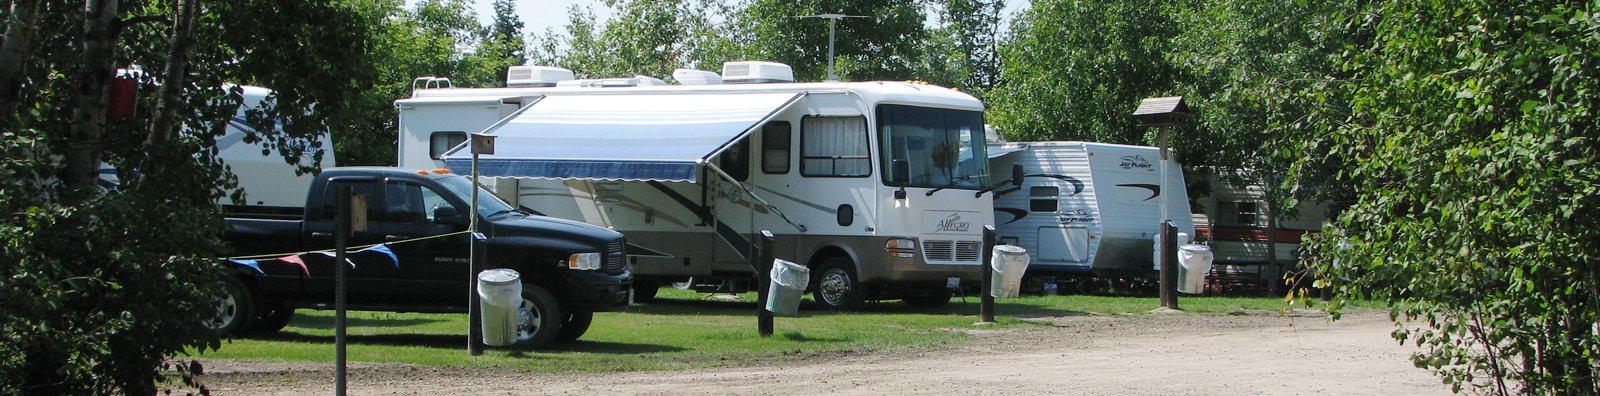 vehicles parked in campground